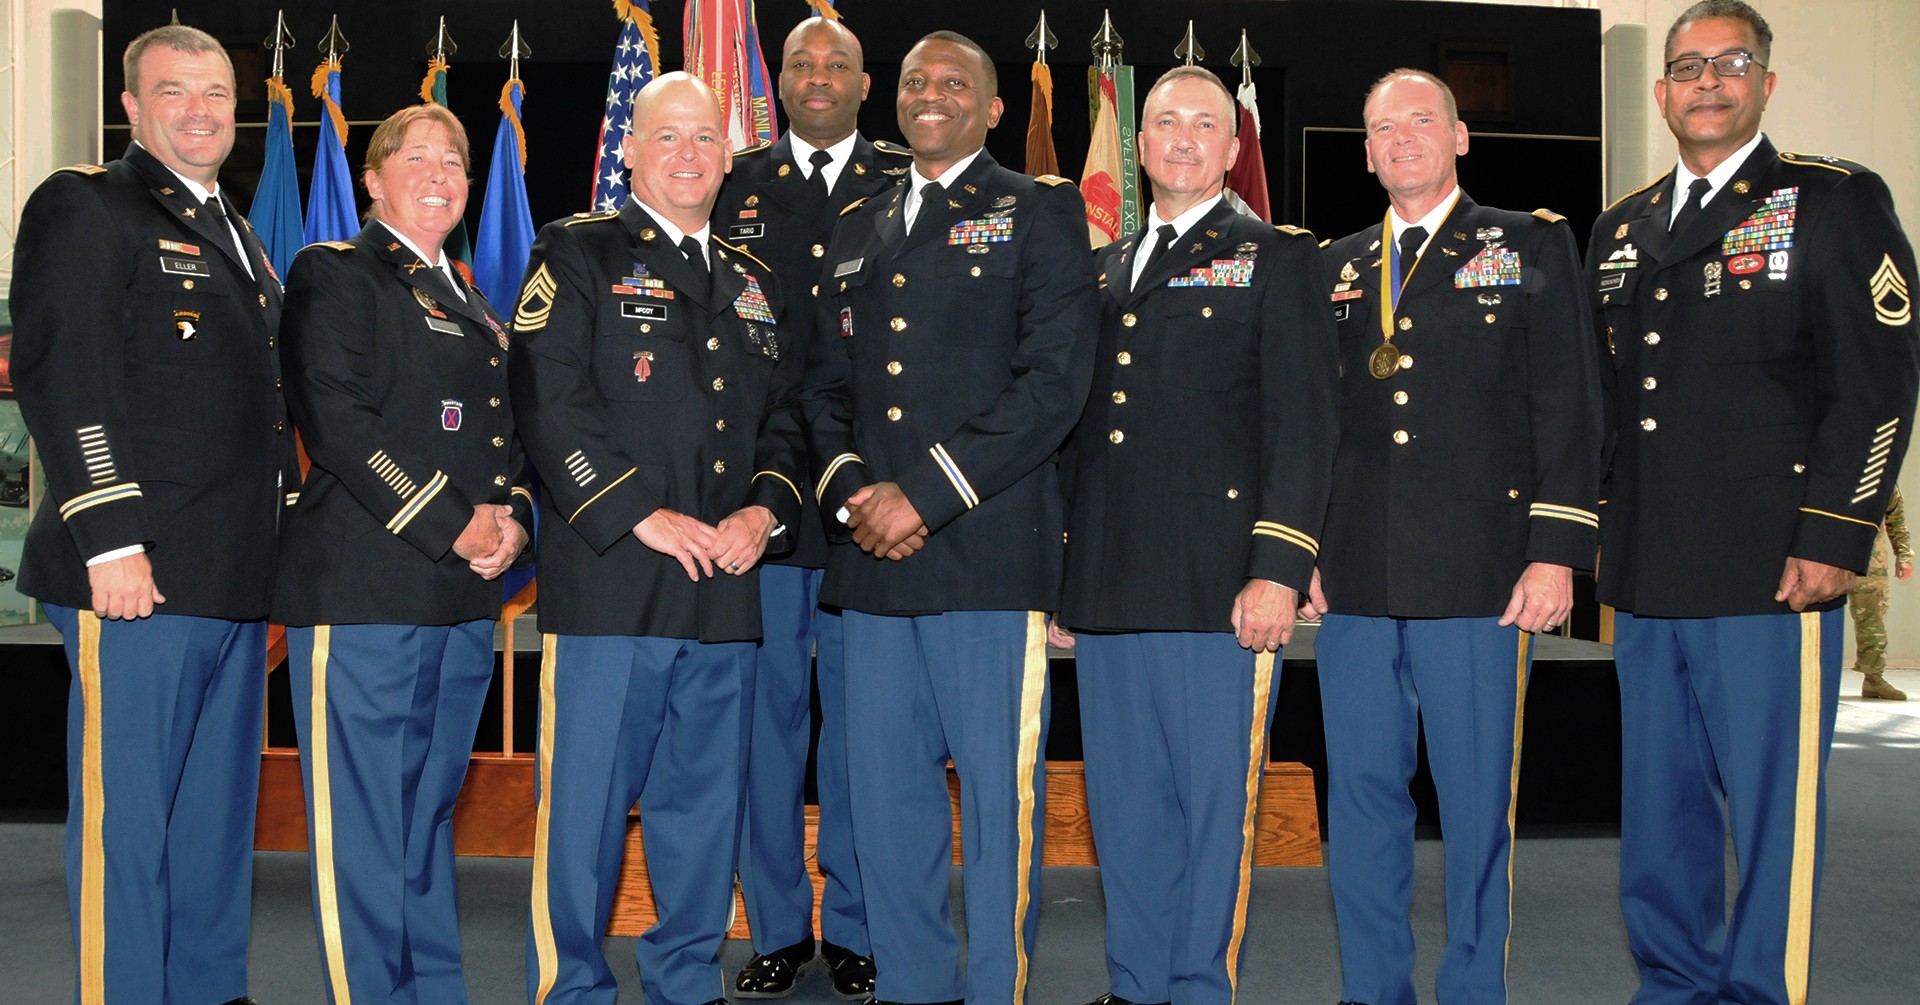 17 years of service: Fort Rucker honors latest retirees during